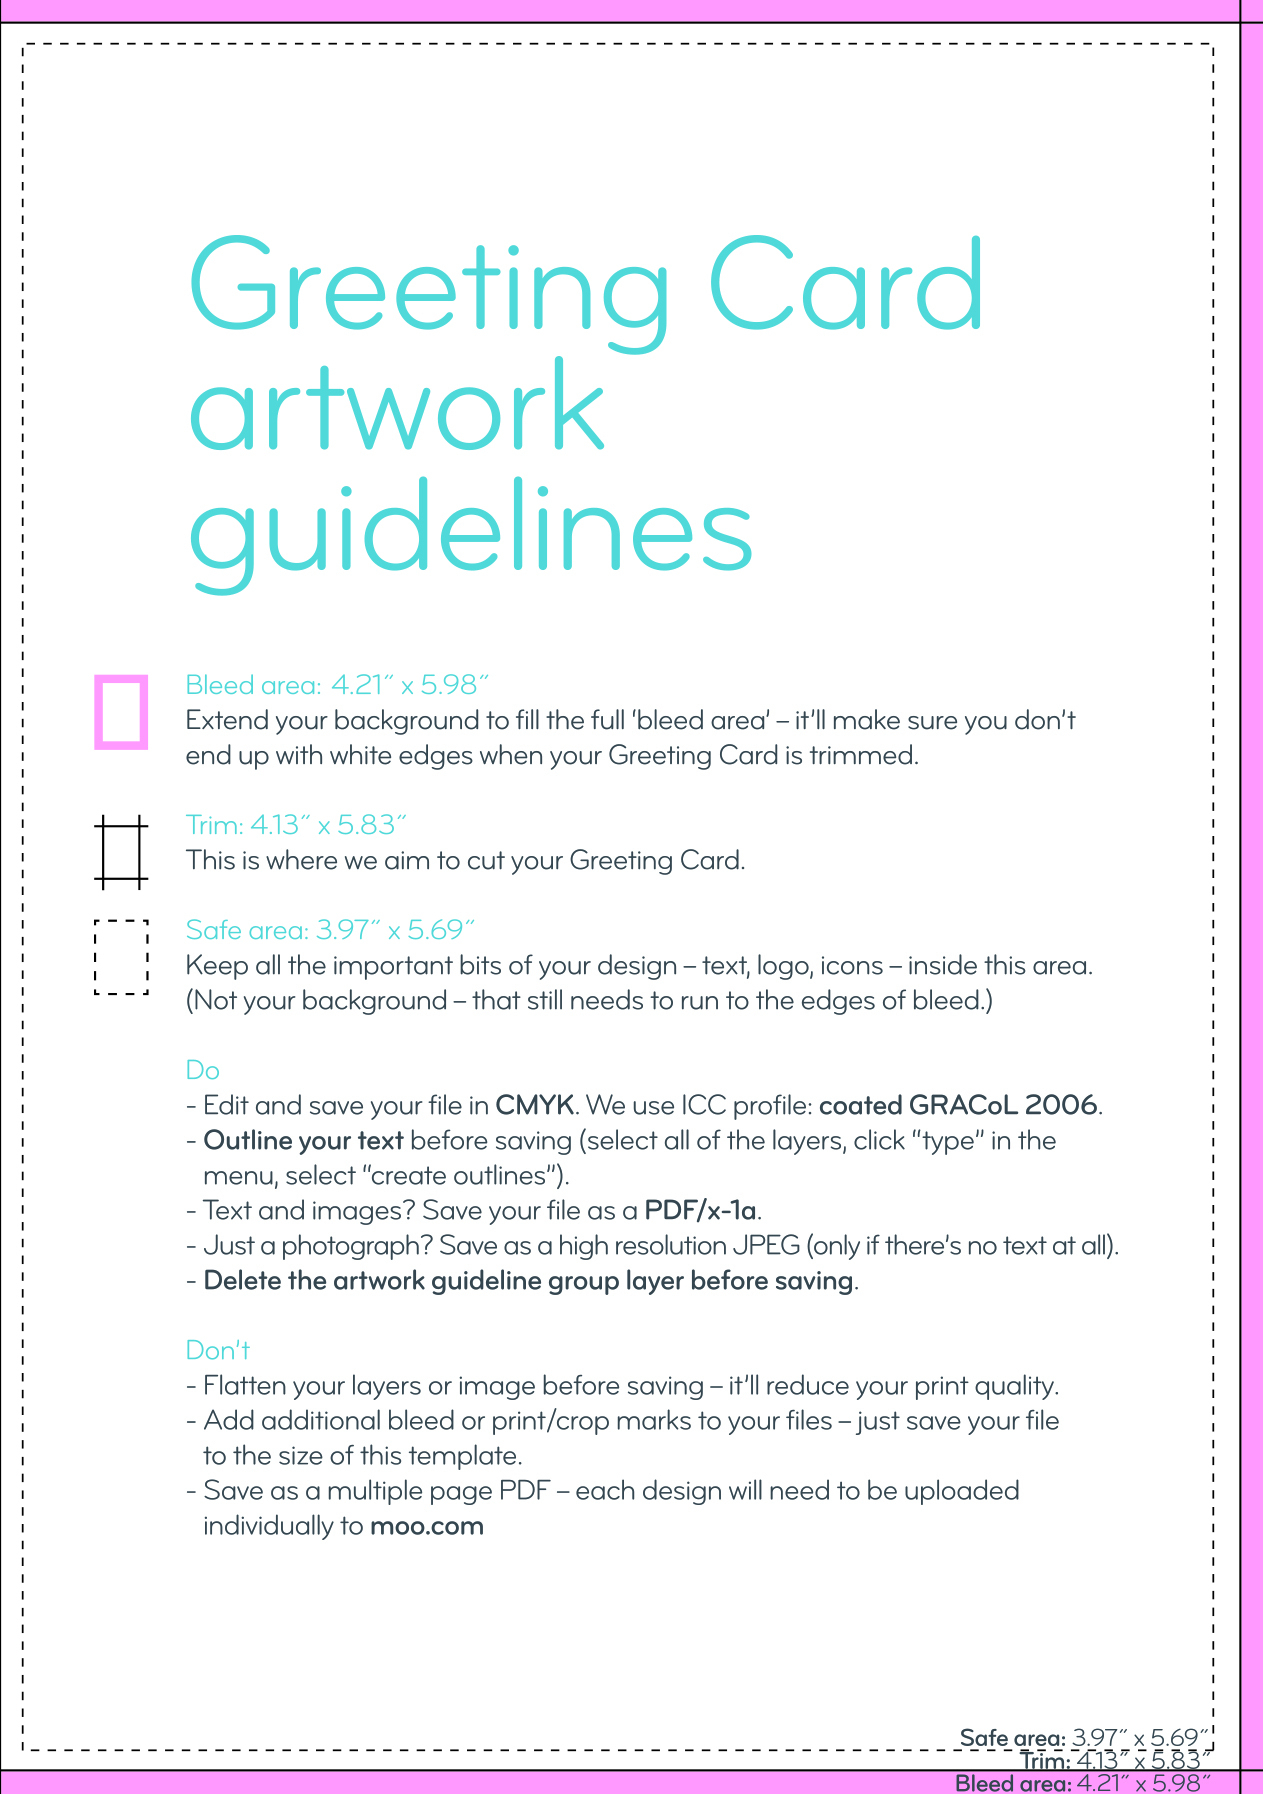 Greeting Card Design Guidelines & Artwork Templates | Moo Throughout Birthday Card Indesign Template